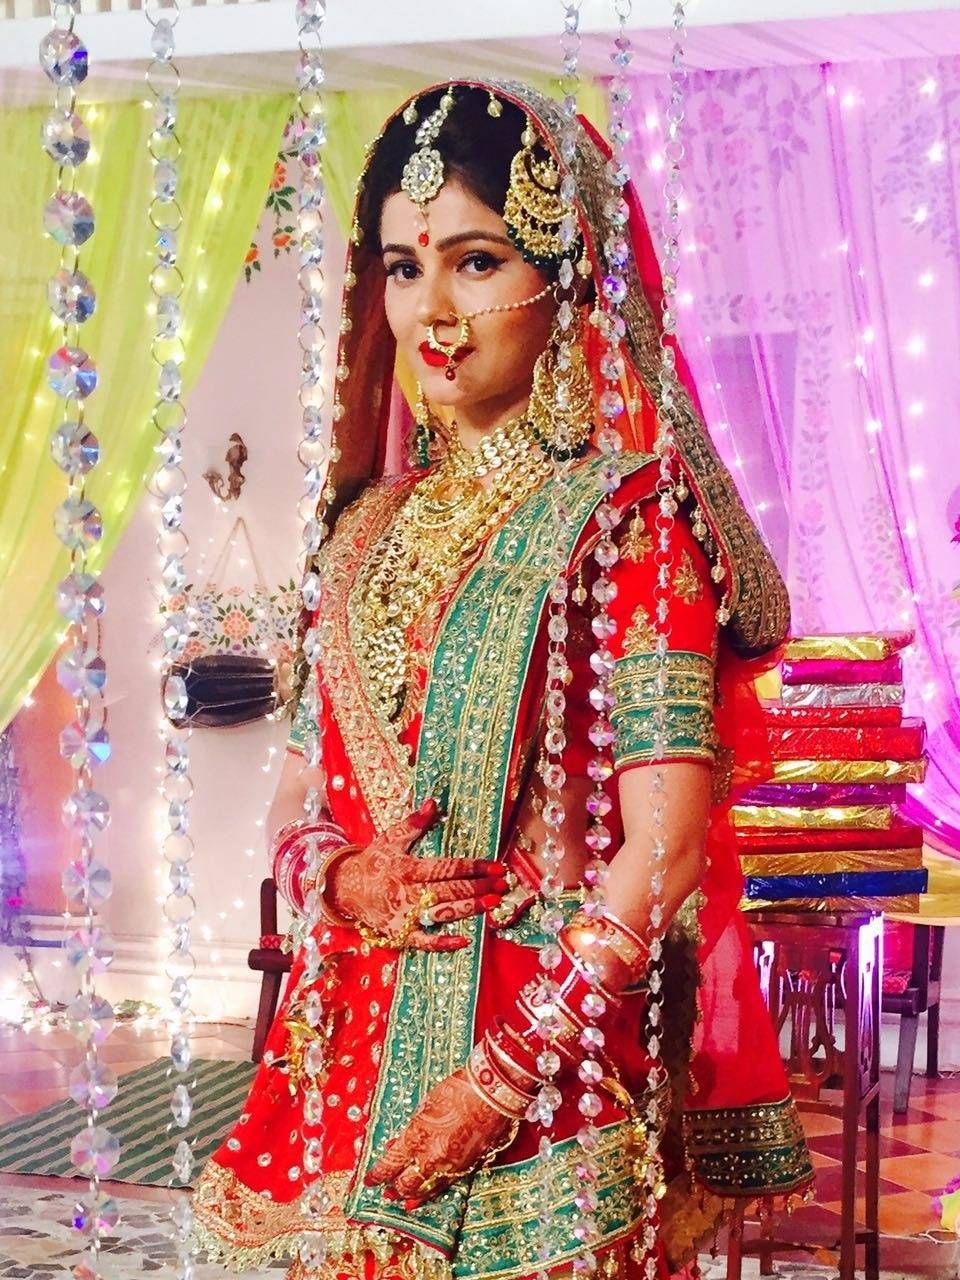 Rubina Dilaik On Quitting Shakti: “I Like To Take The Entire Responsibility Of The Show, Now It Was With Someone Else”